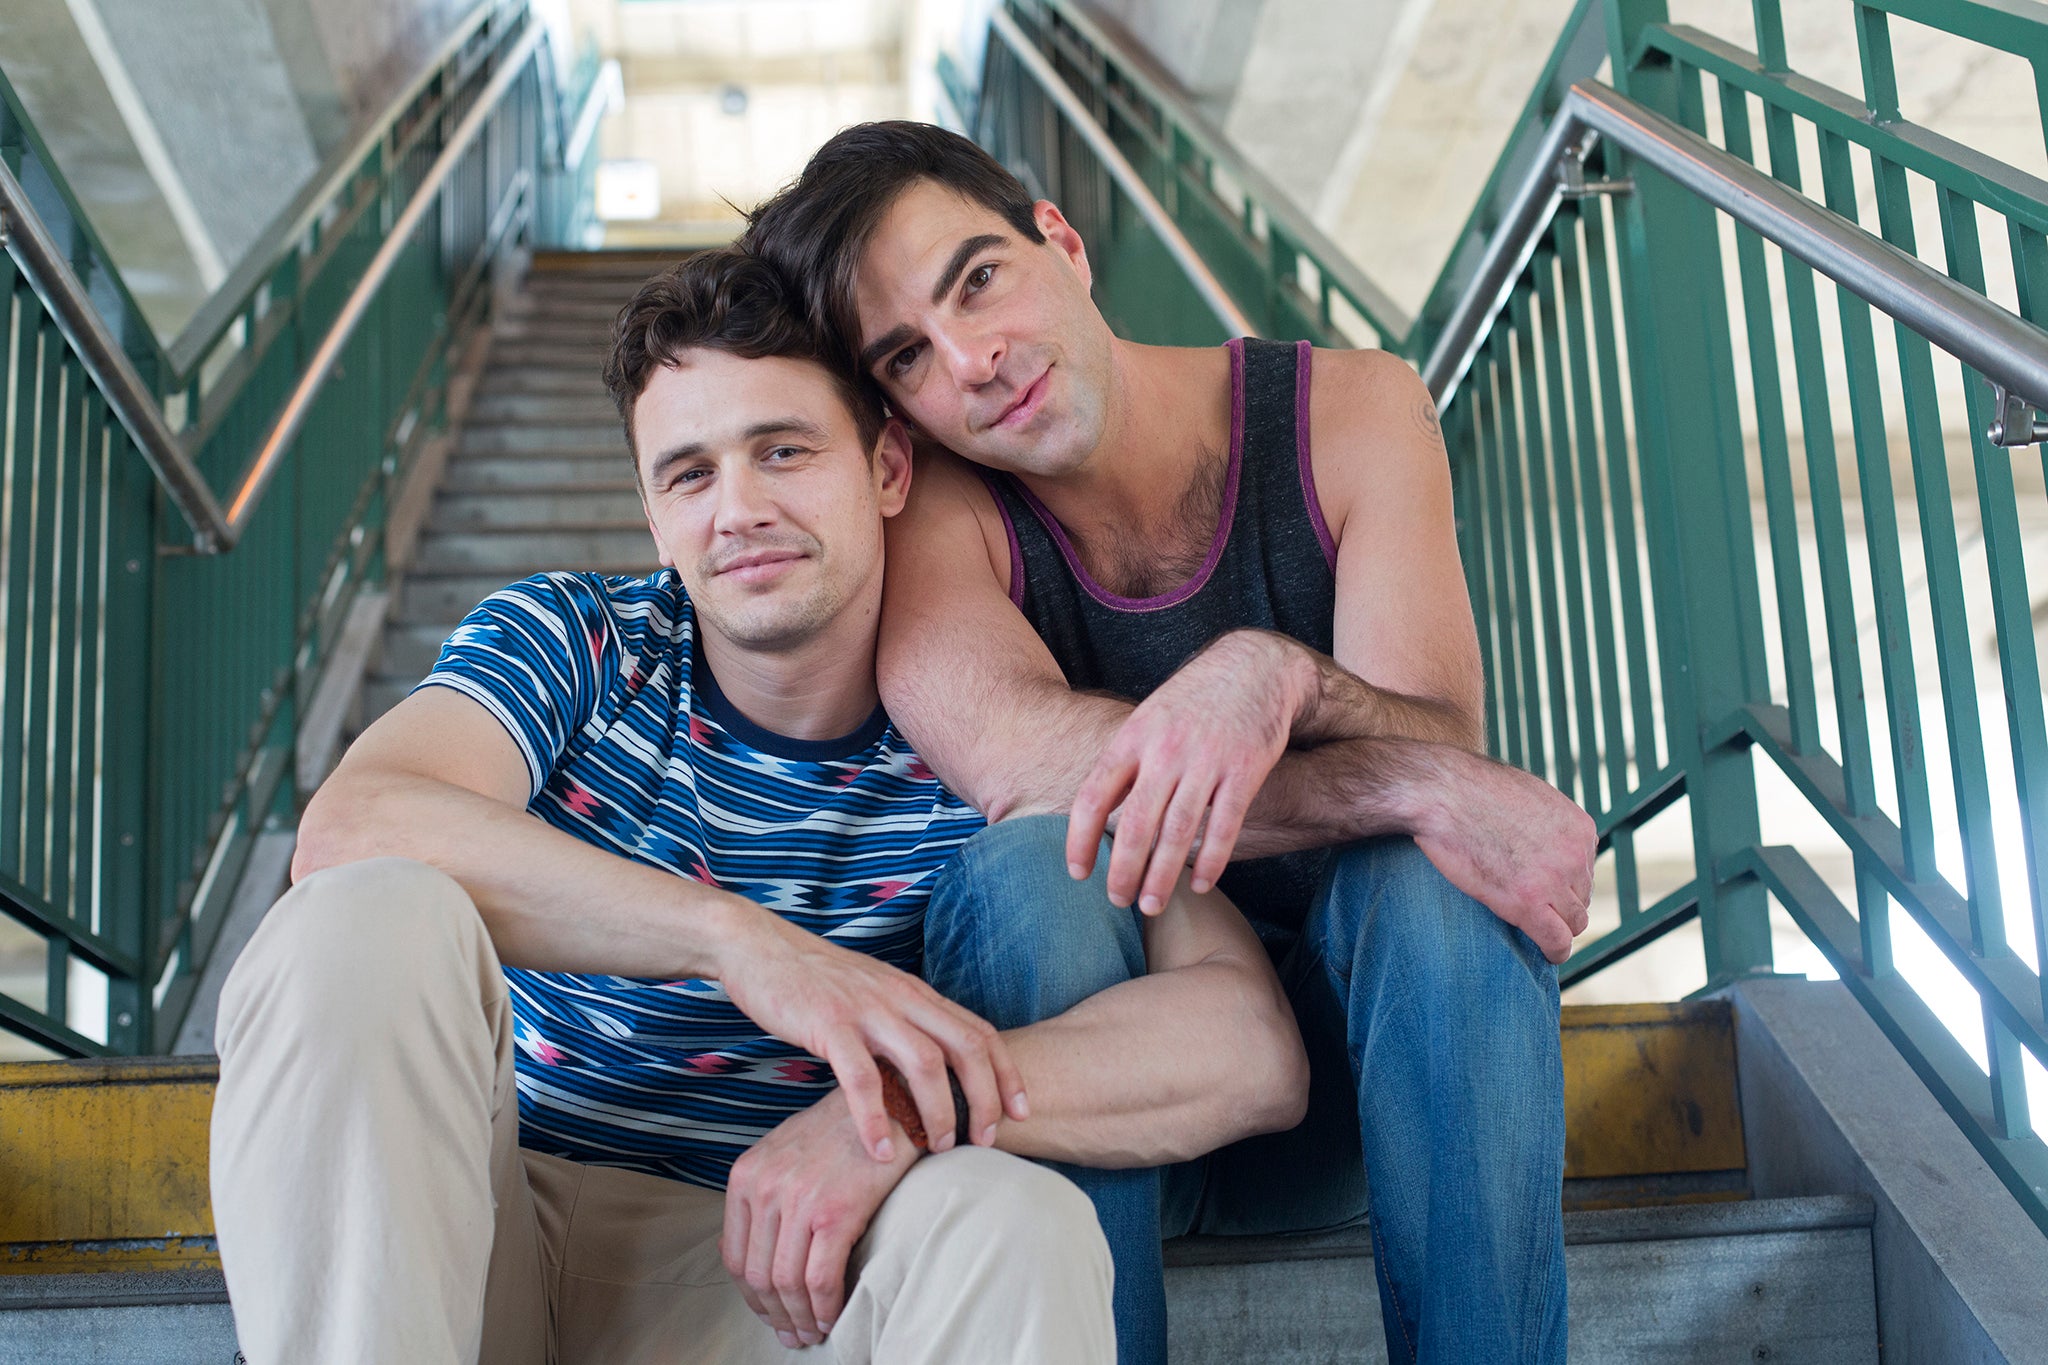 James Franco and Zachary Quinto in I Am Michael